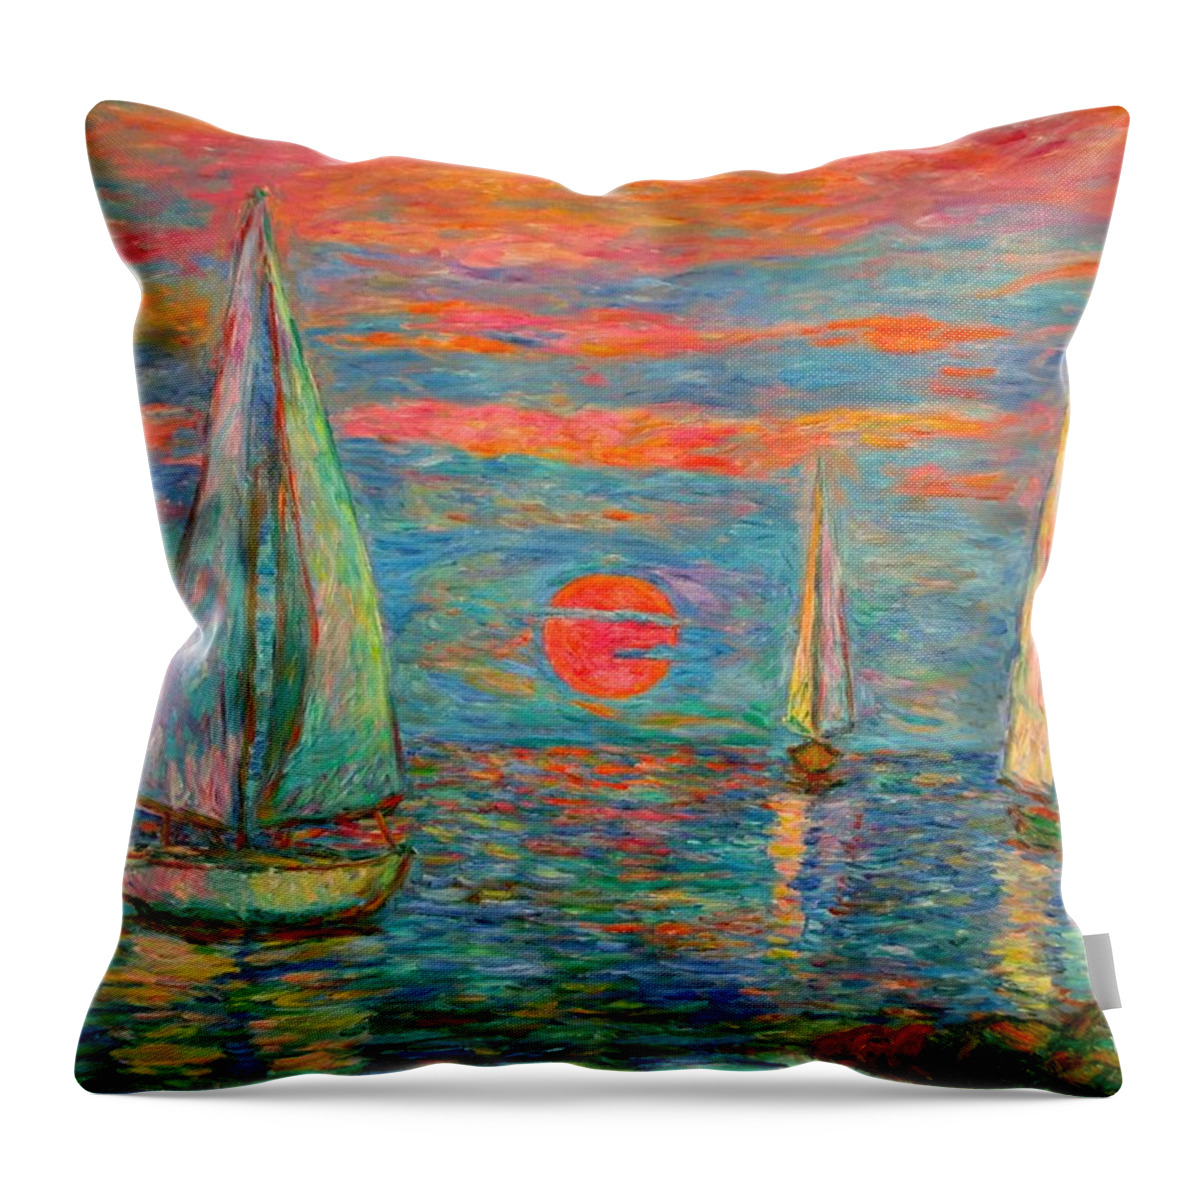 Ocean Sunset Throw Pillow featuring the painting Sailboat Sunrise by Kendall Kessler